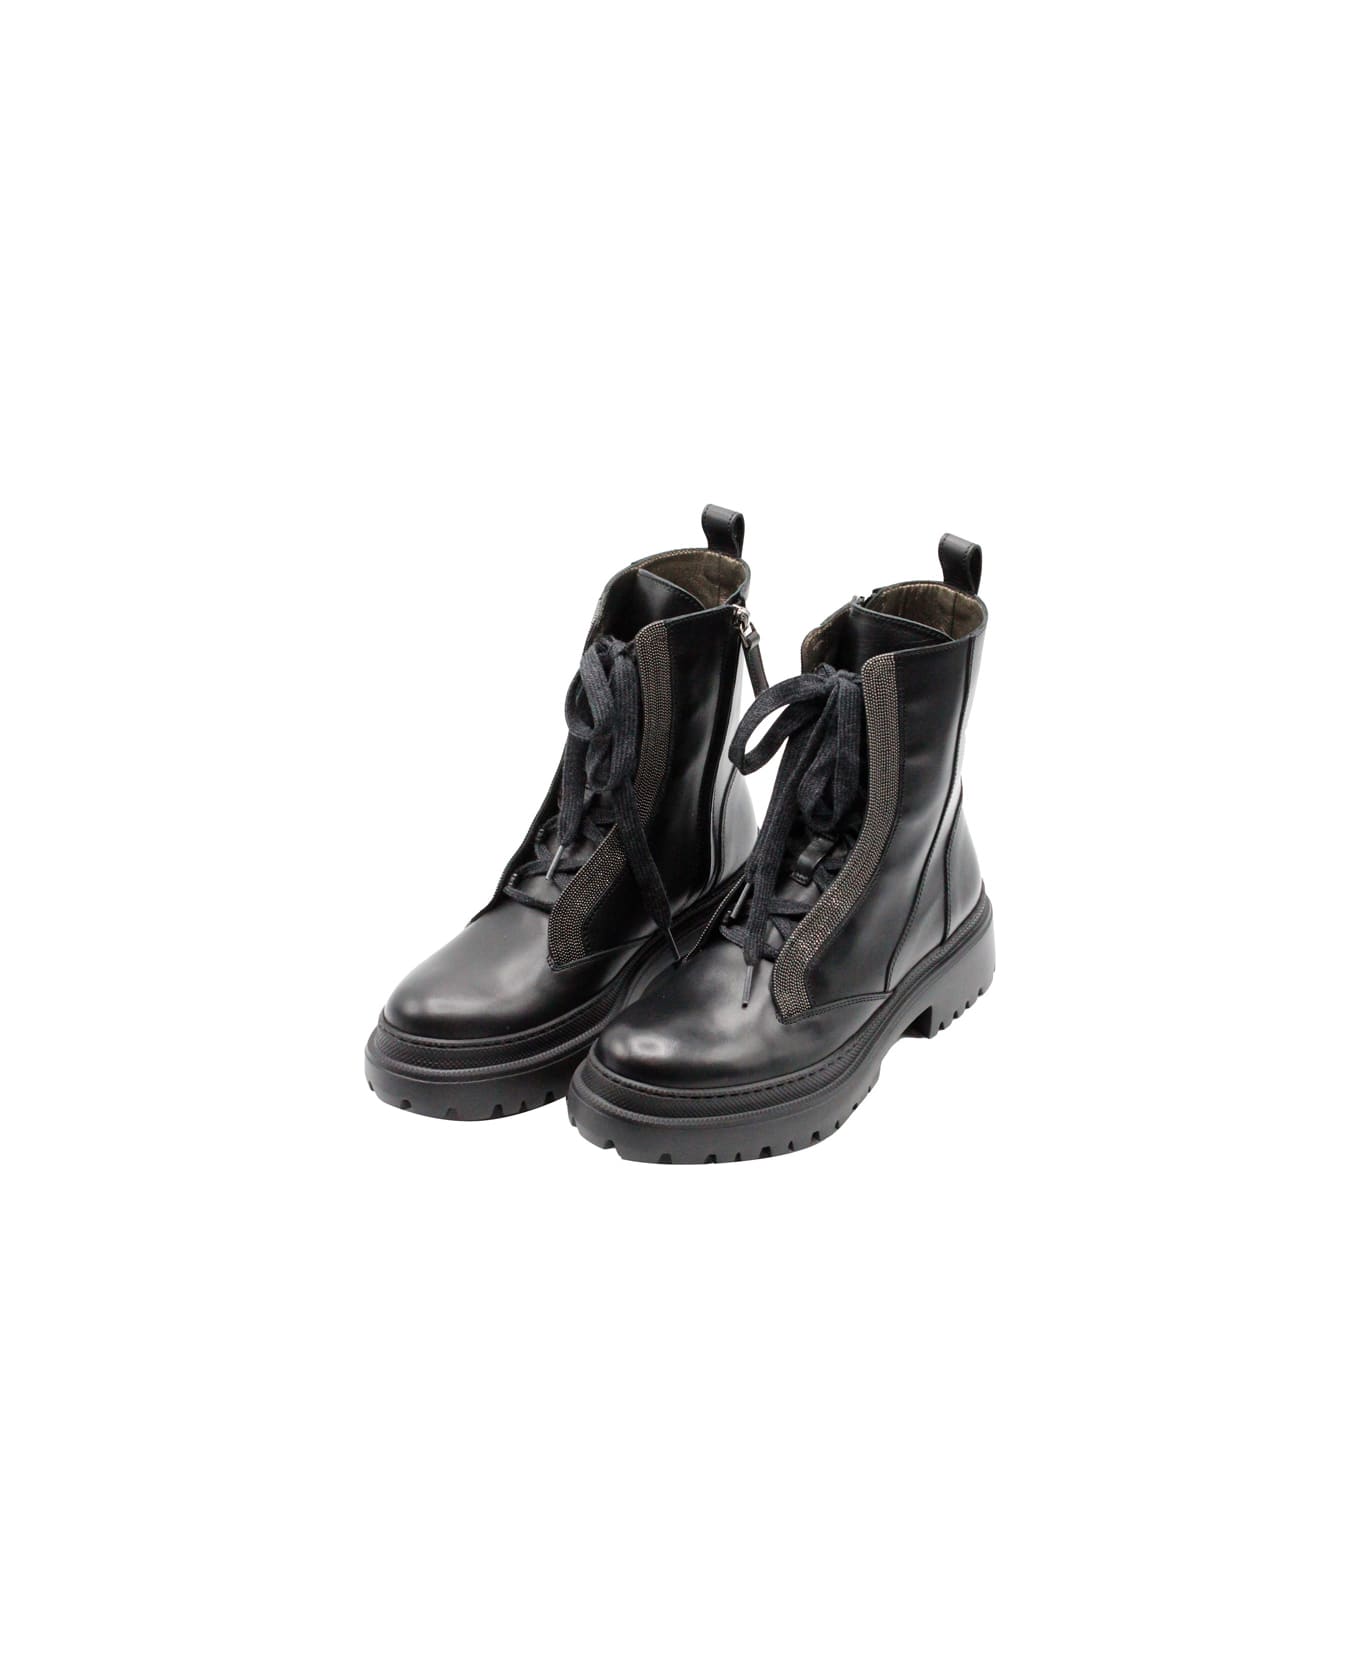 Brunello Cucinelli Amphibious Ankle Boot In Leather With Side Zip And Jewels On The Side Band Of The Laces - Black